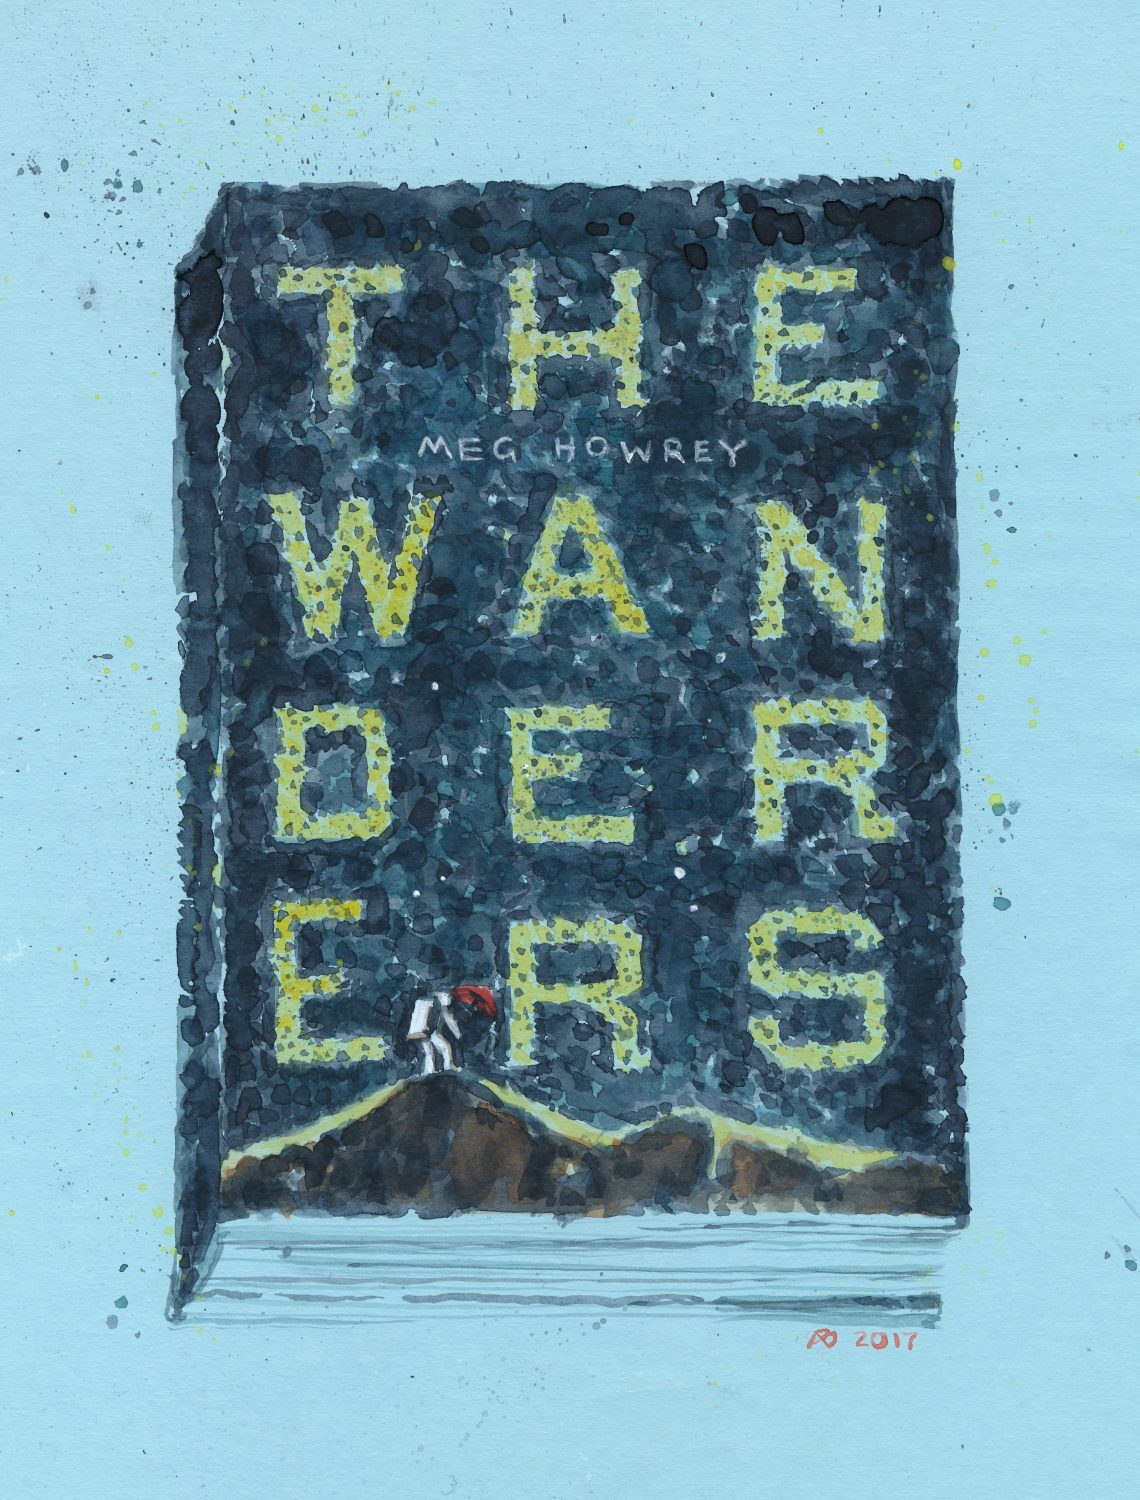 a book cover reading The Wanderers in speckled watercolour finish, tiny astronaut with an umbrella at the bottom